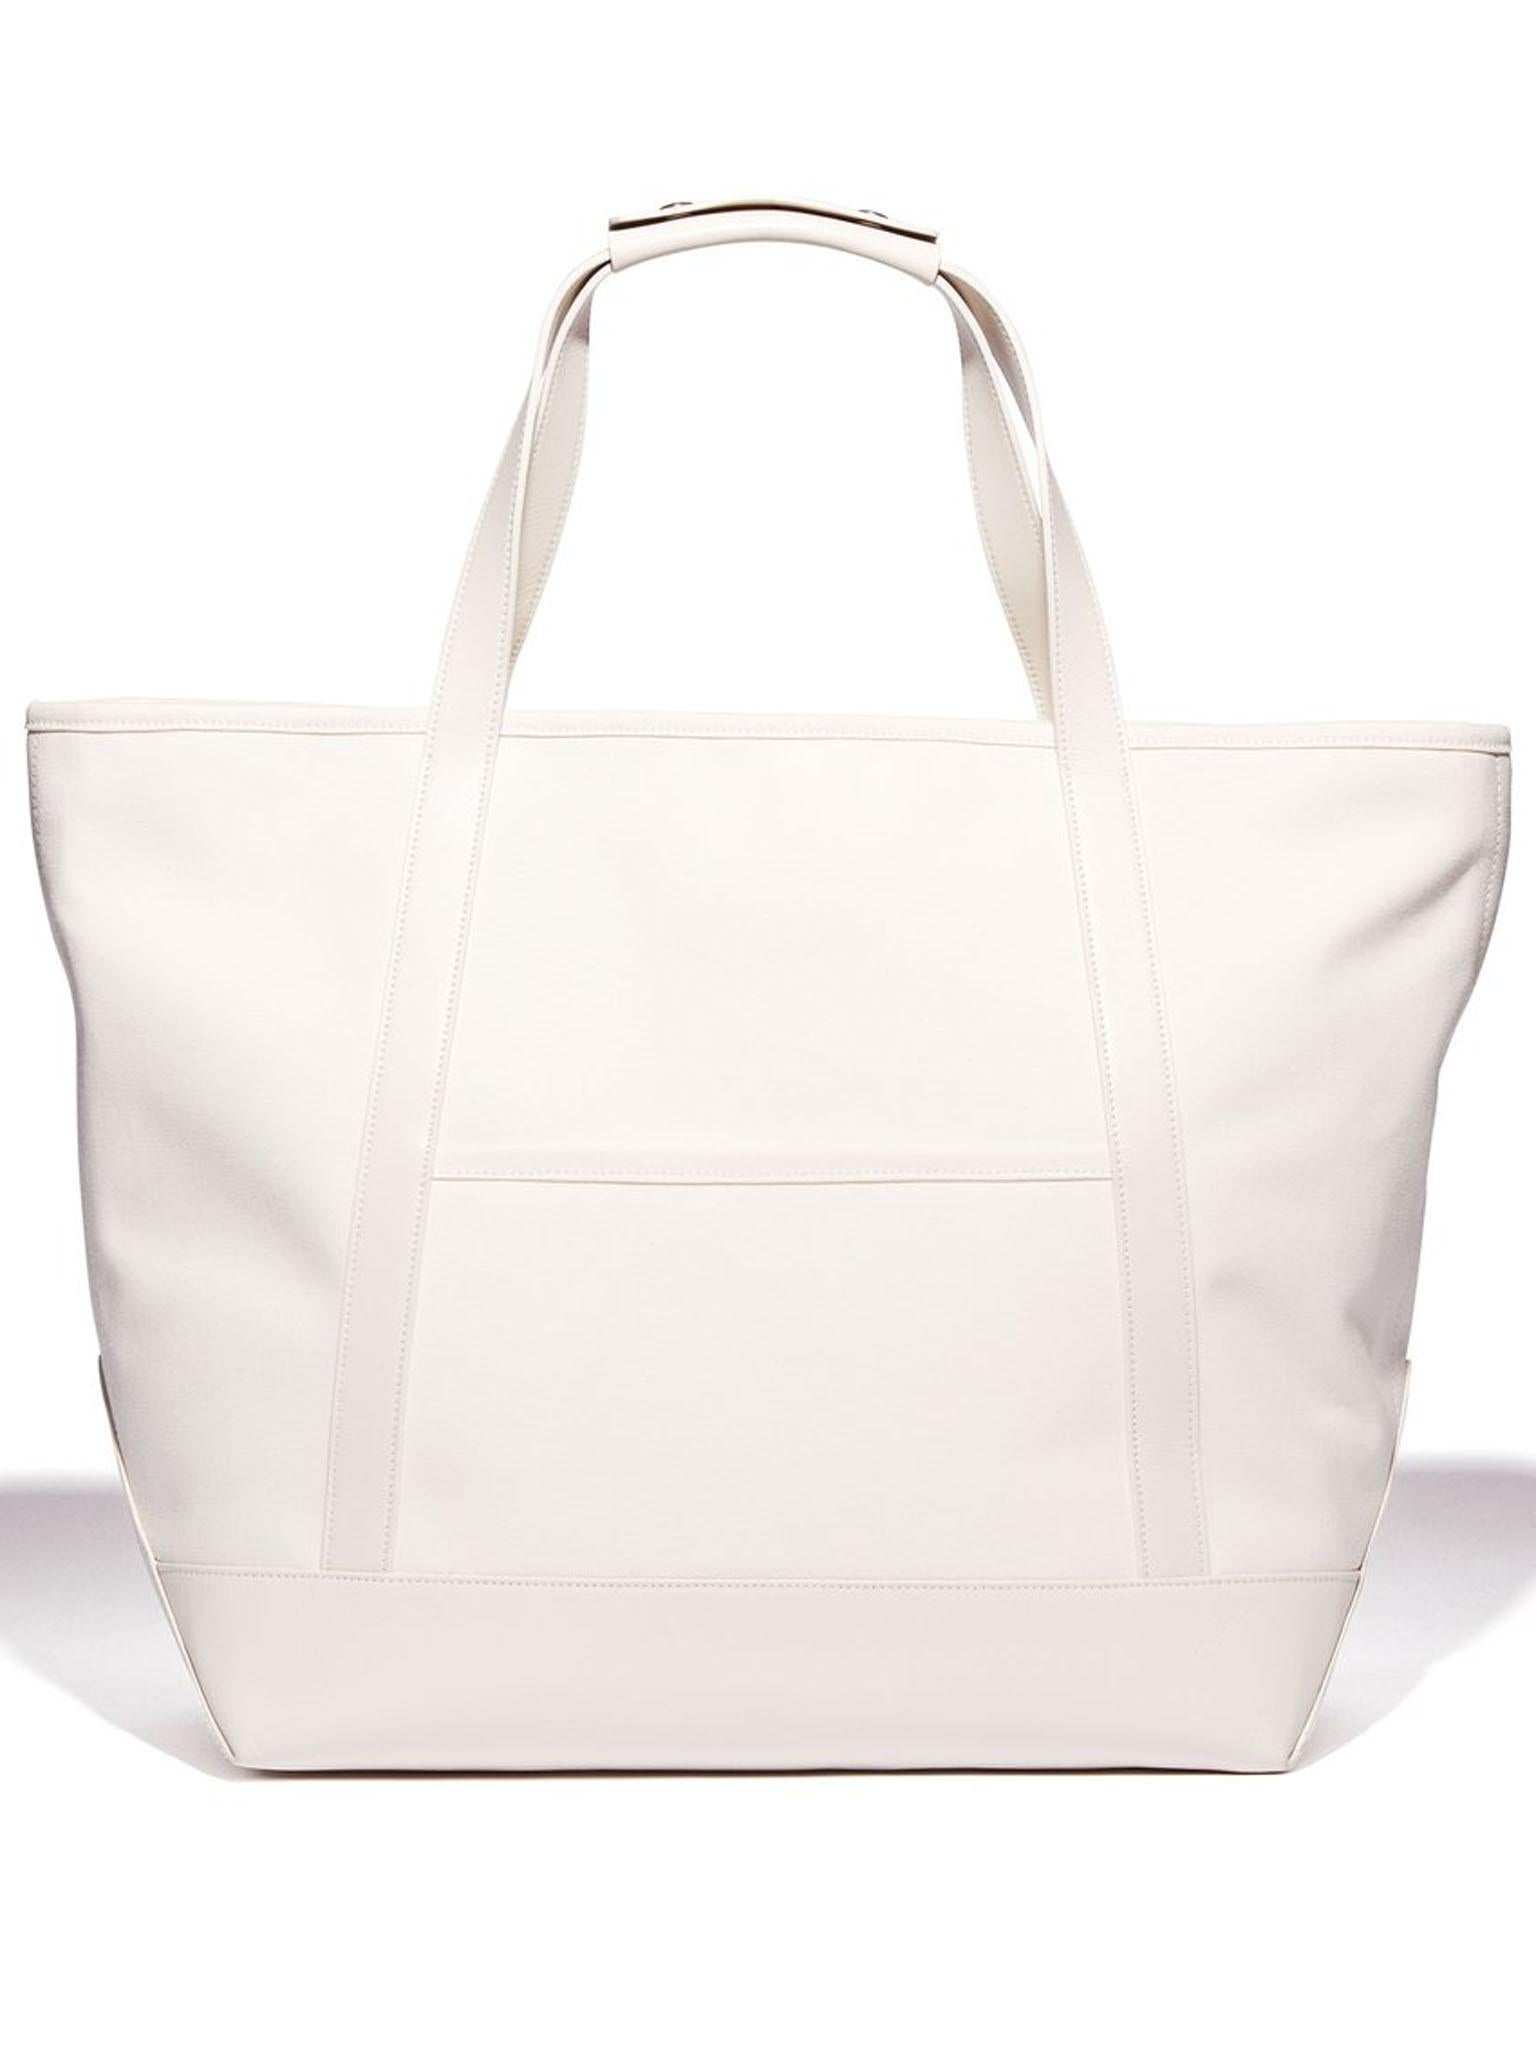 Goop Label's Classic G.Tote is a steep $285